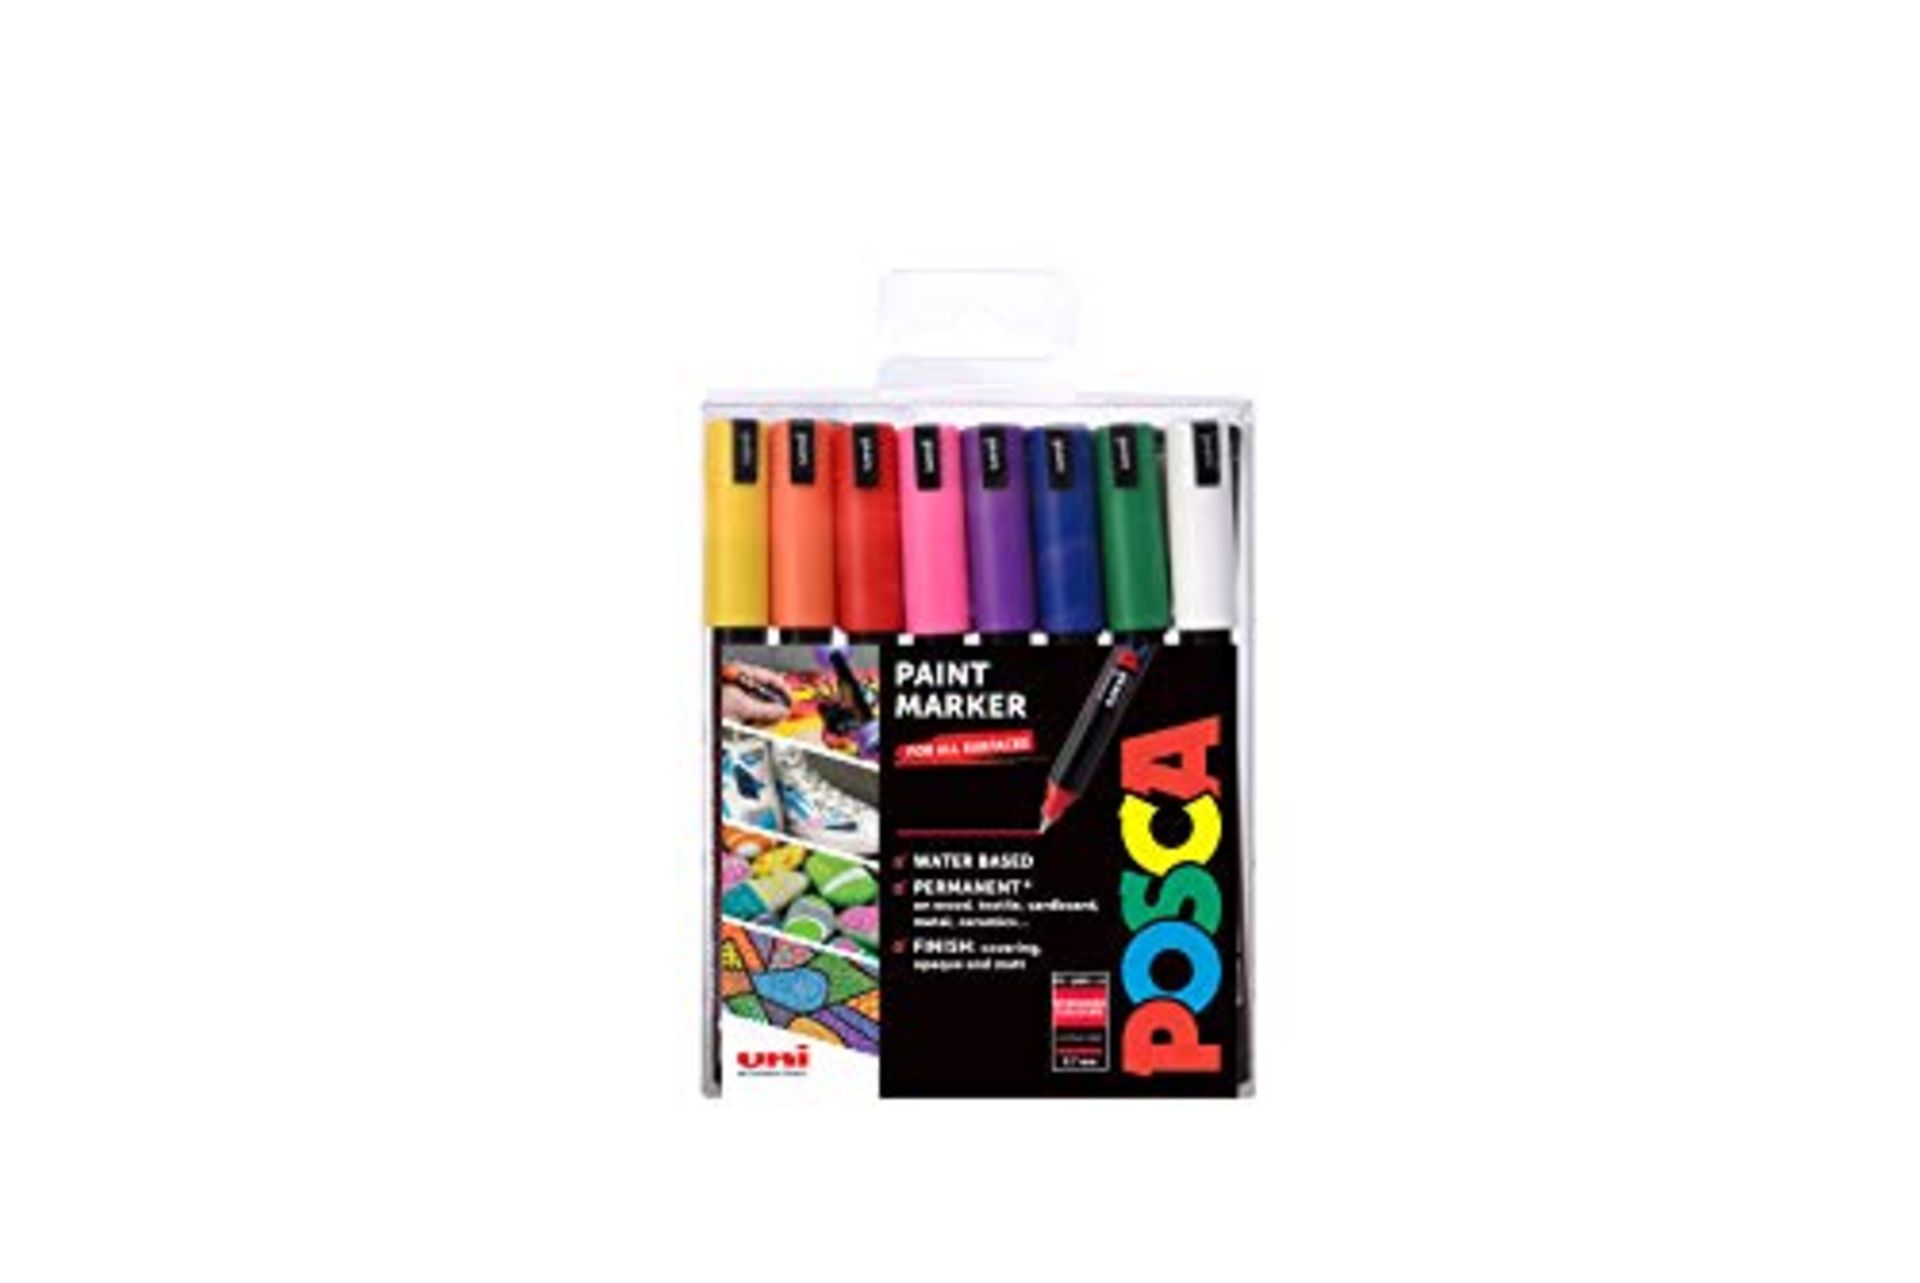 [NEW] POSCA PC-1MR Permanent Marker Paint Pens. Ultra Fine Tip for Art & Crafts. Multi